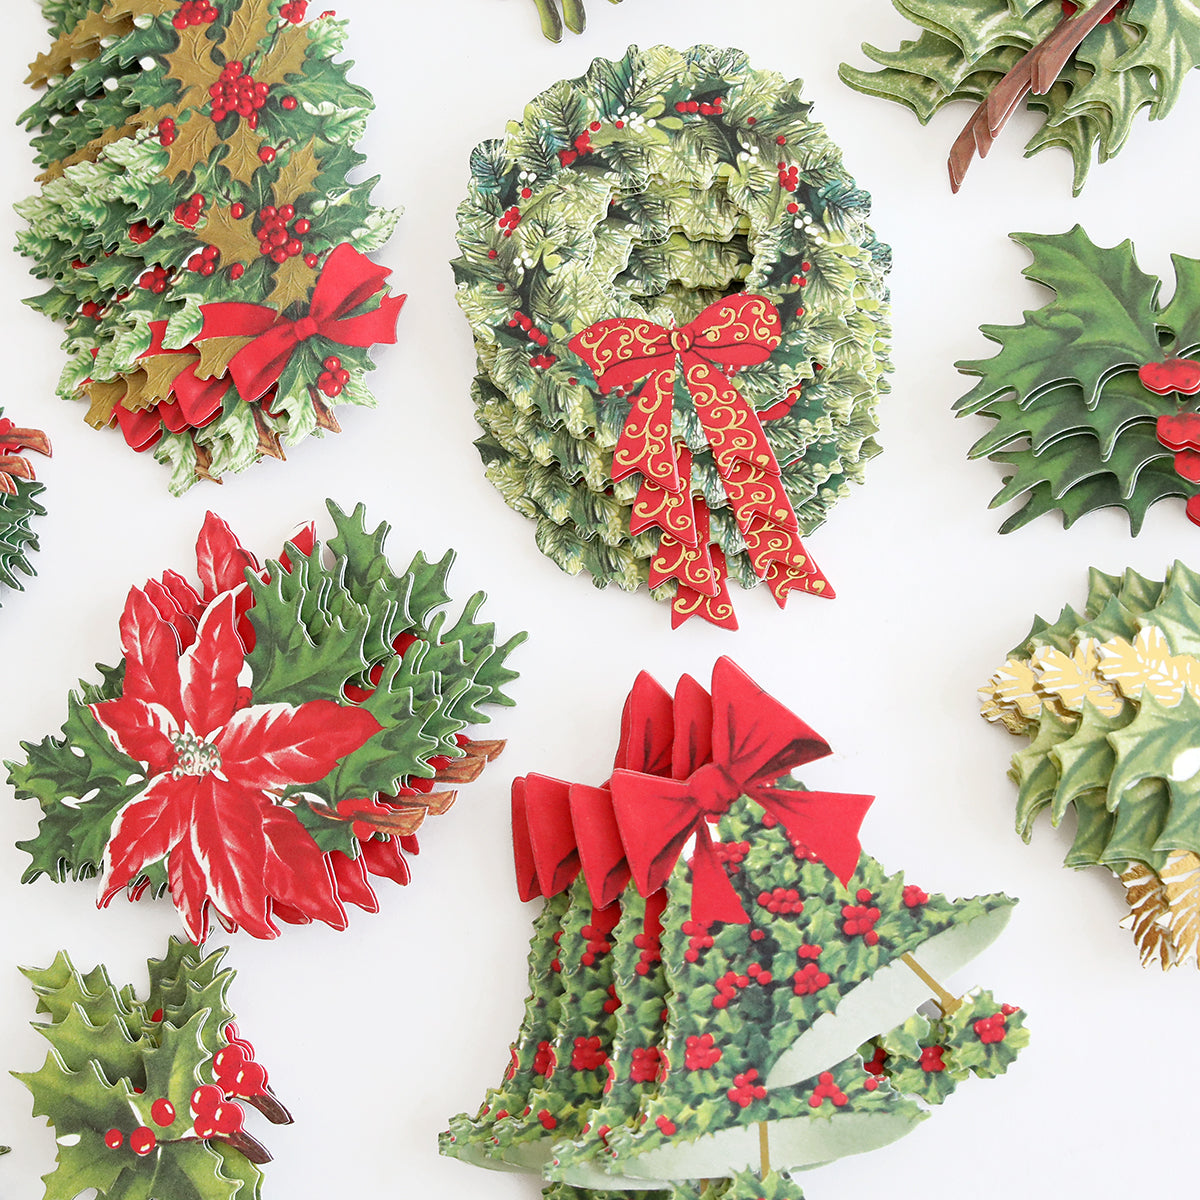 Retro Holly Sticker Library, a seasonal craft project, is arranged on a white surface.